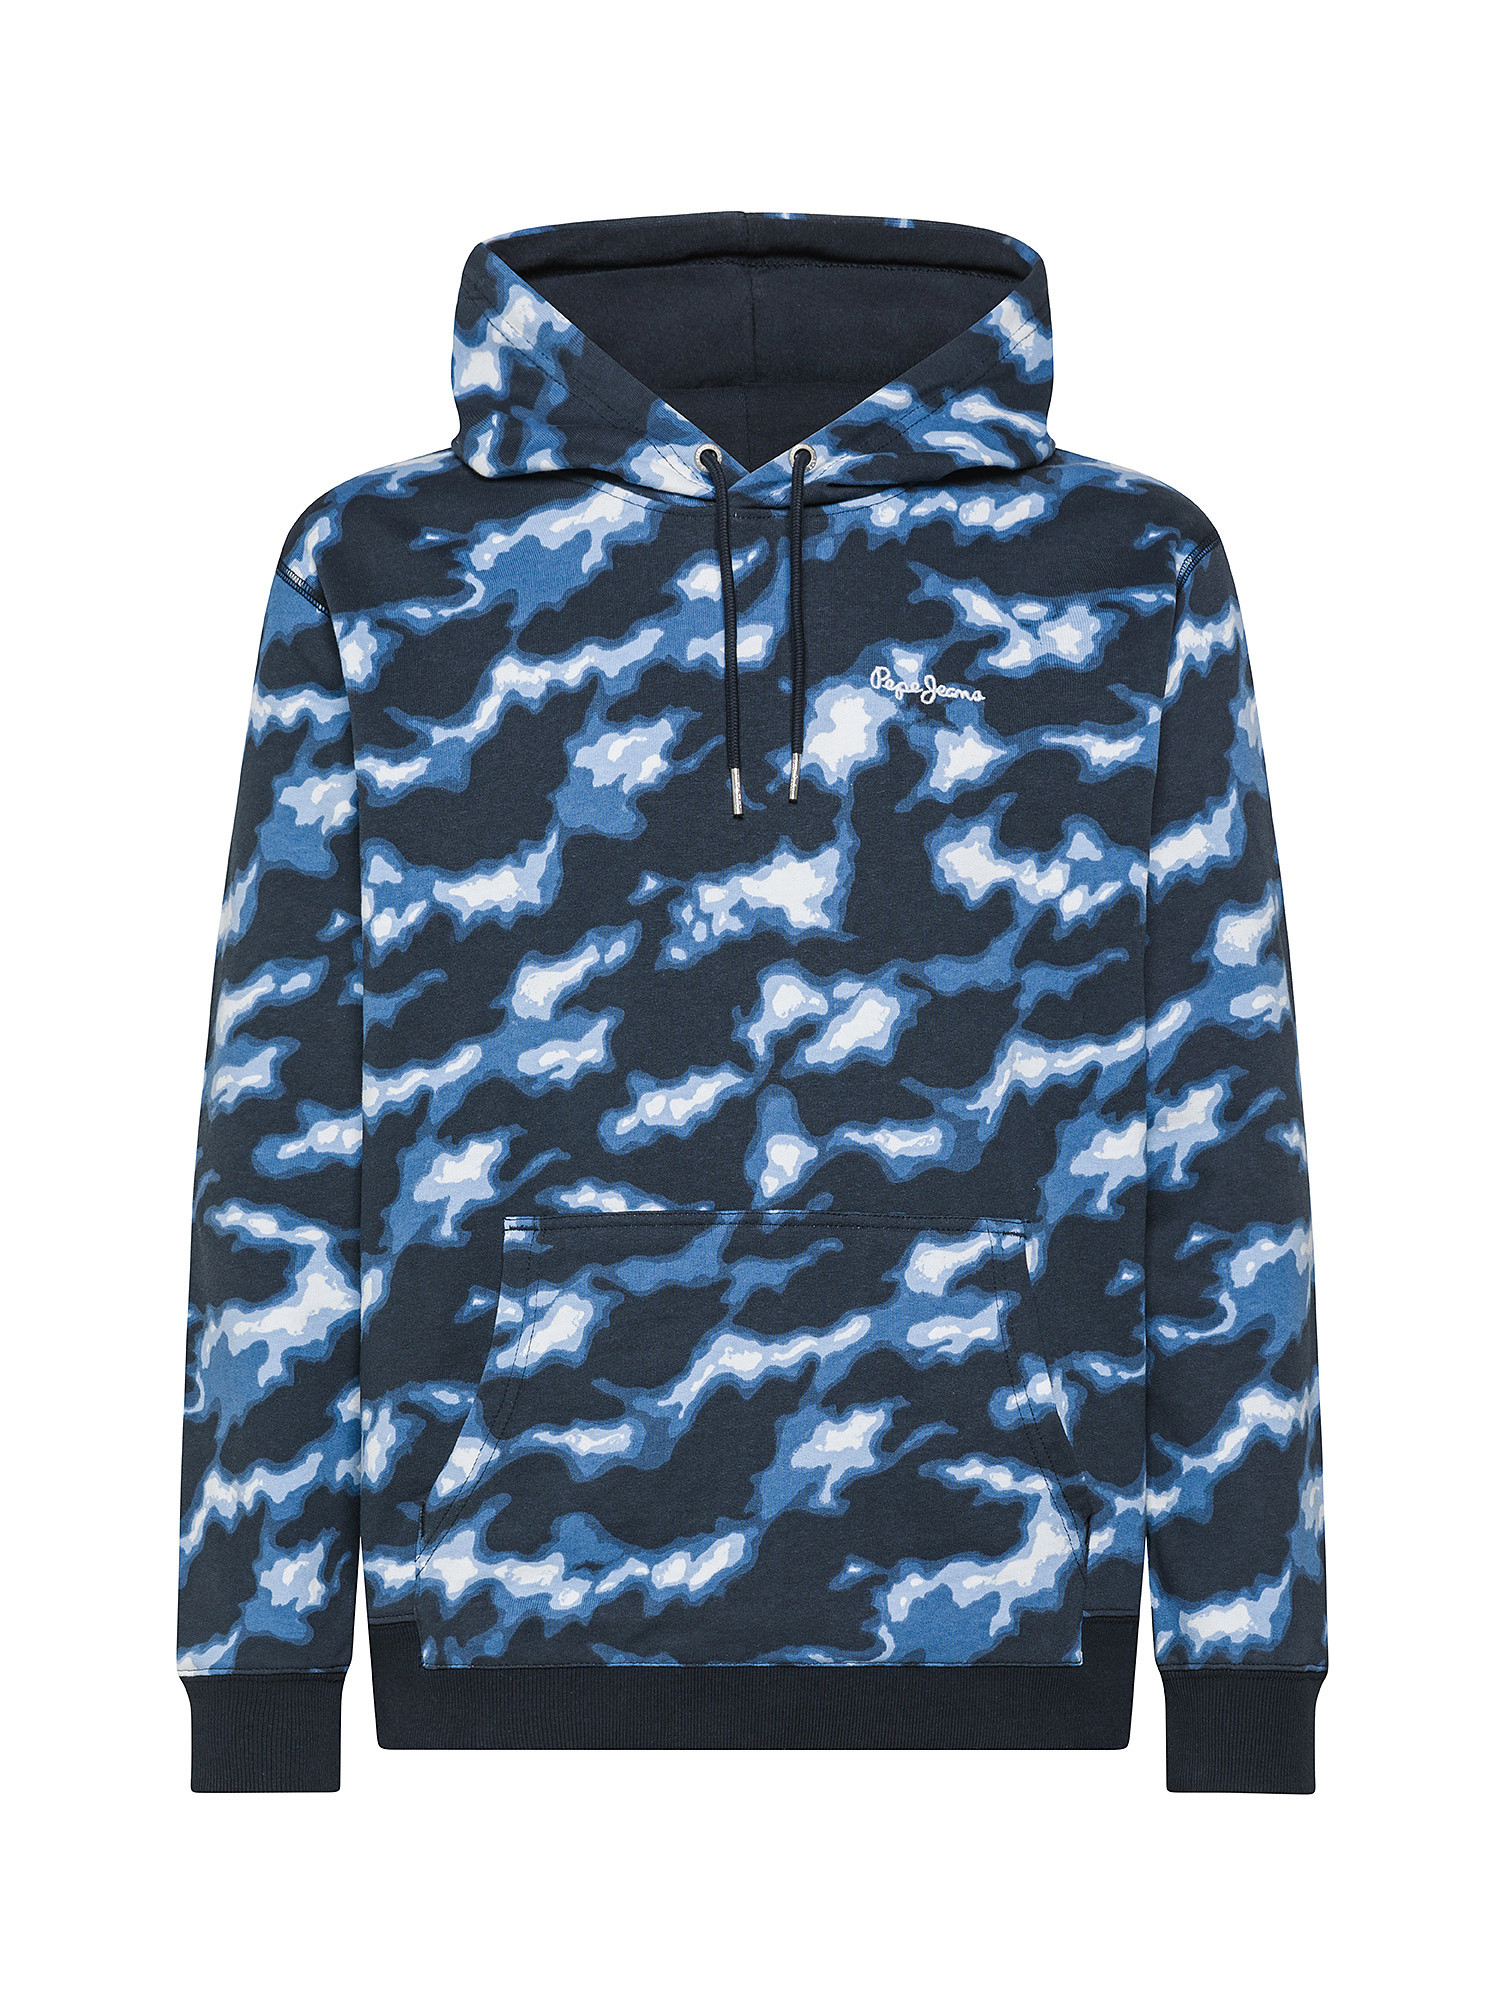 Pepe Jeans - Felpa con stampa camouflage, Blu scuro, large image number 0